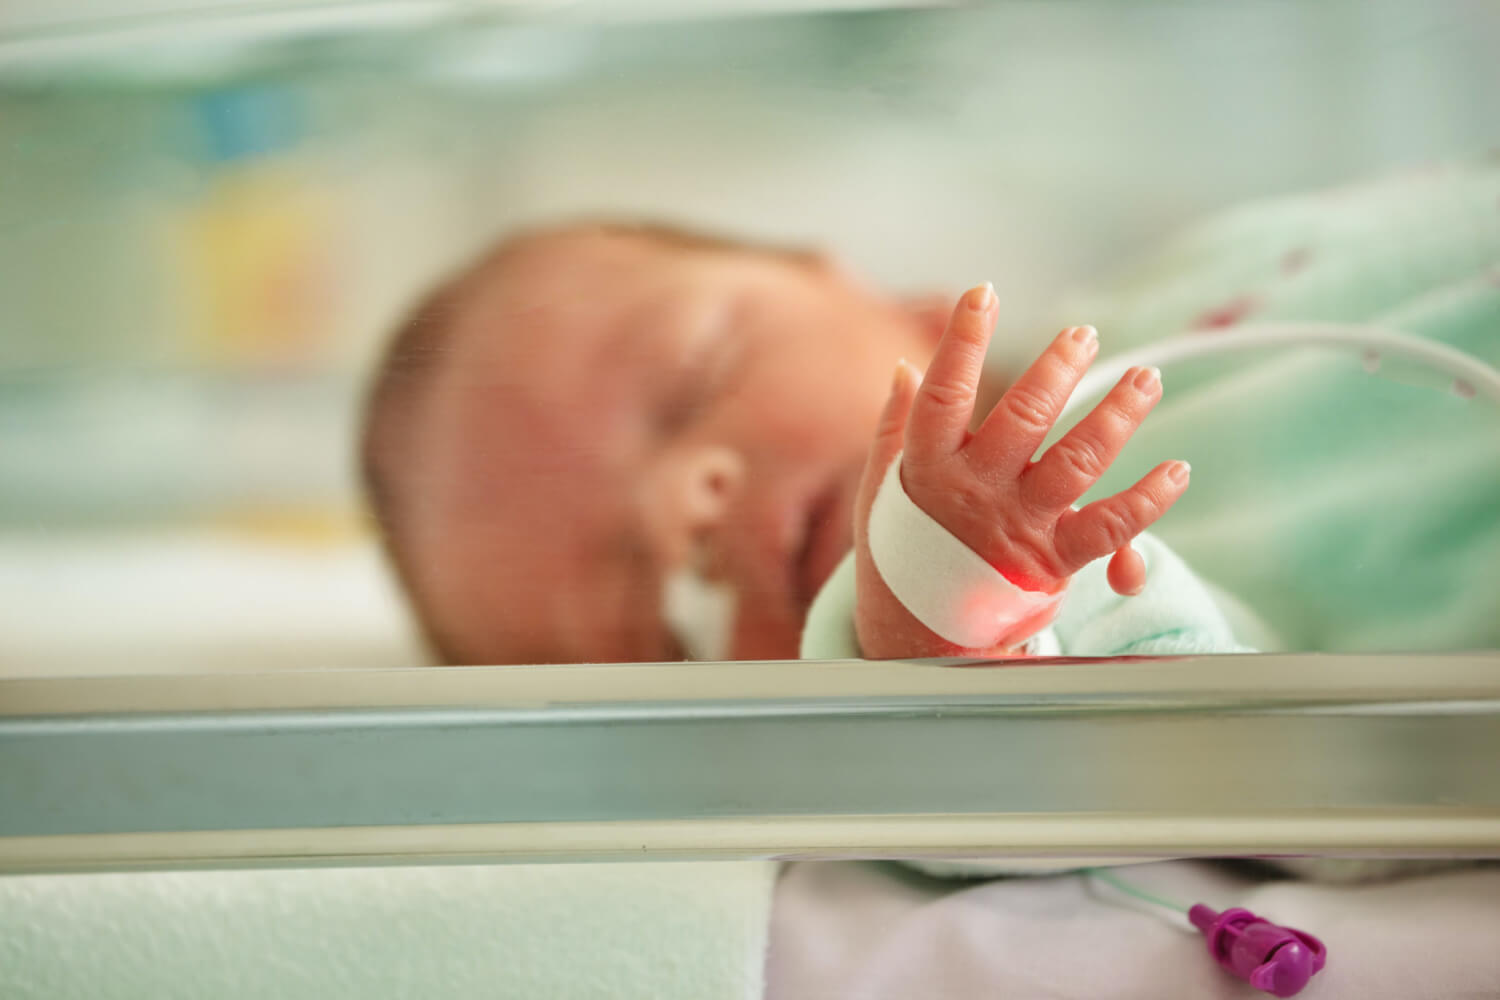 Polydactyly(Extra Fingers) in Babies – Causes, Symptoms And Treatment